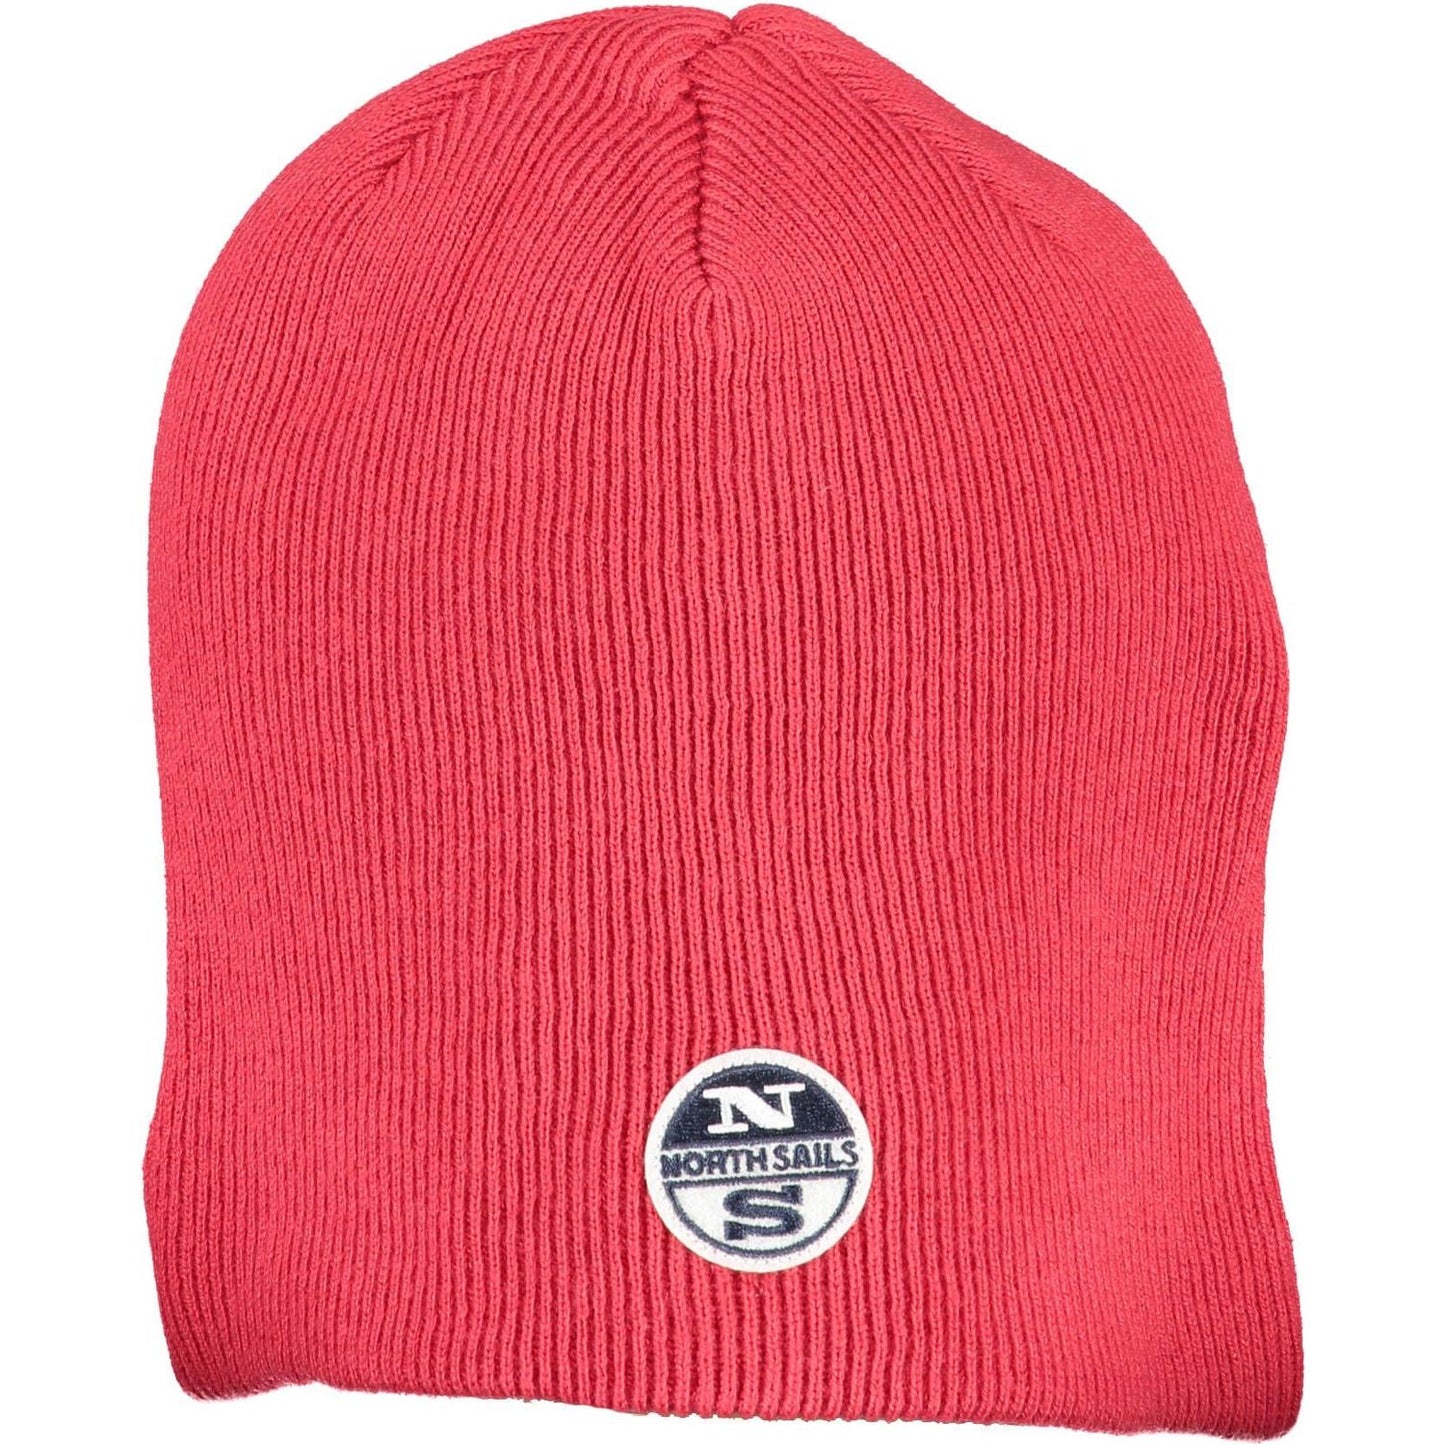 North Sails Chic Red Cotton Cap with Iconic Logo chic-red-cotton-cap-with-iconic-logo